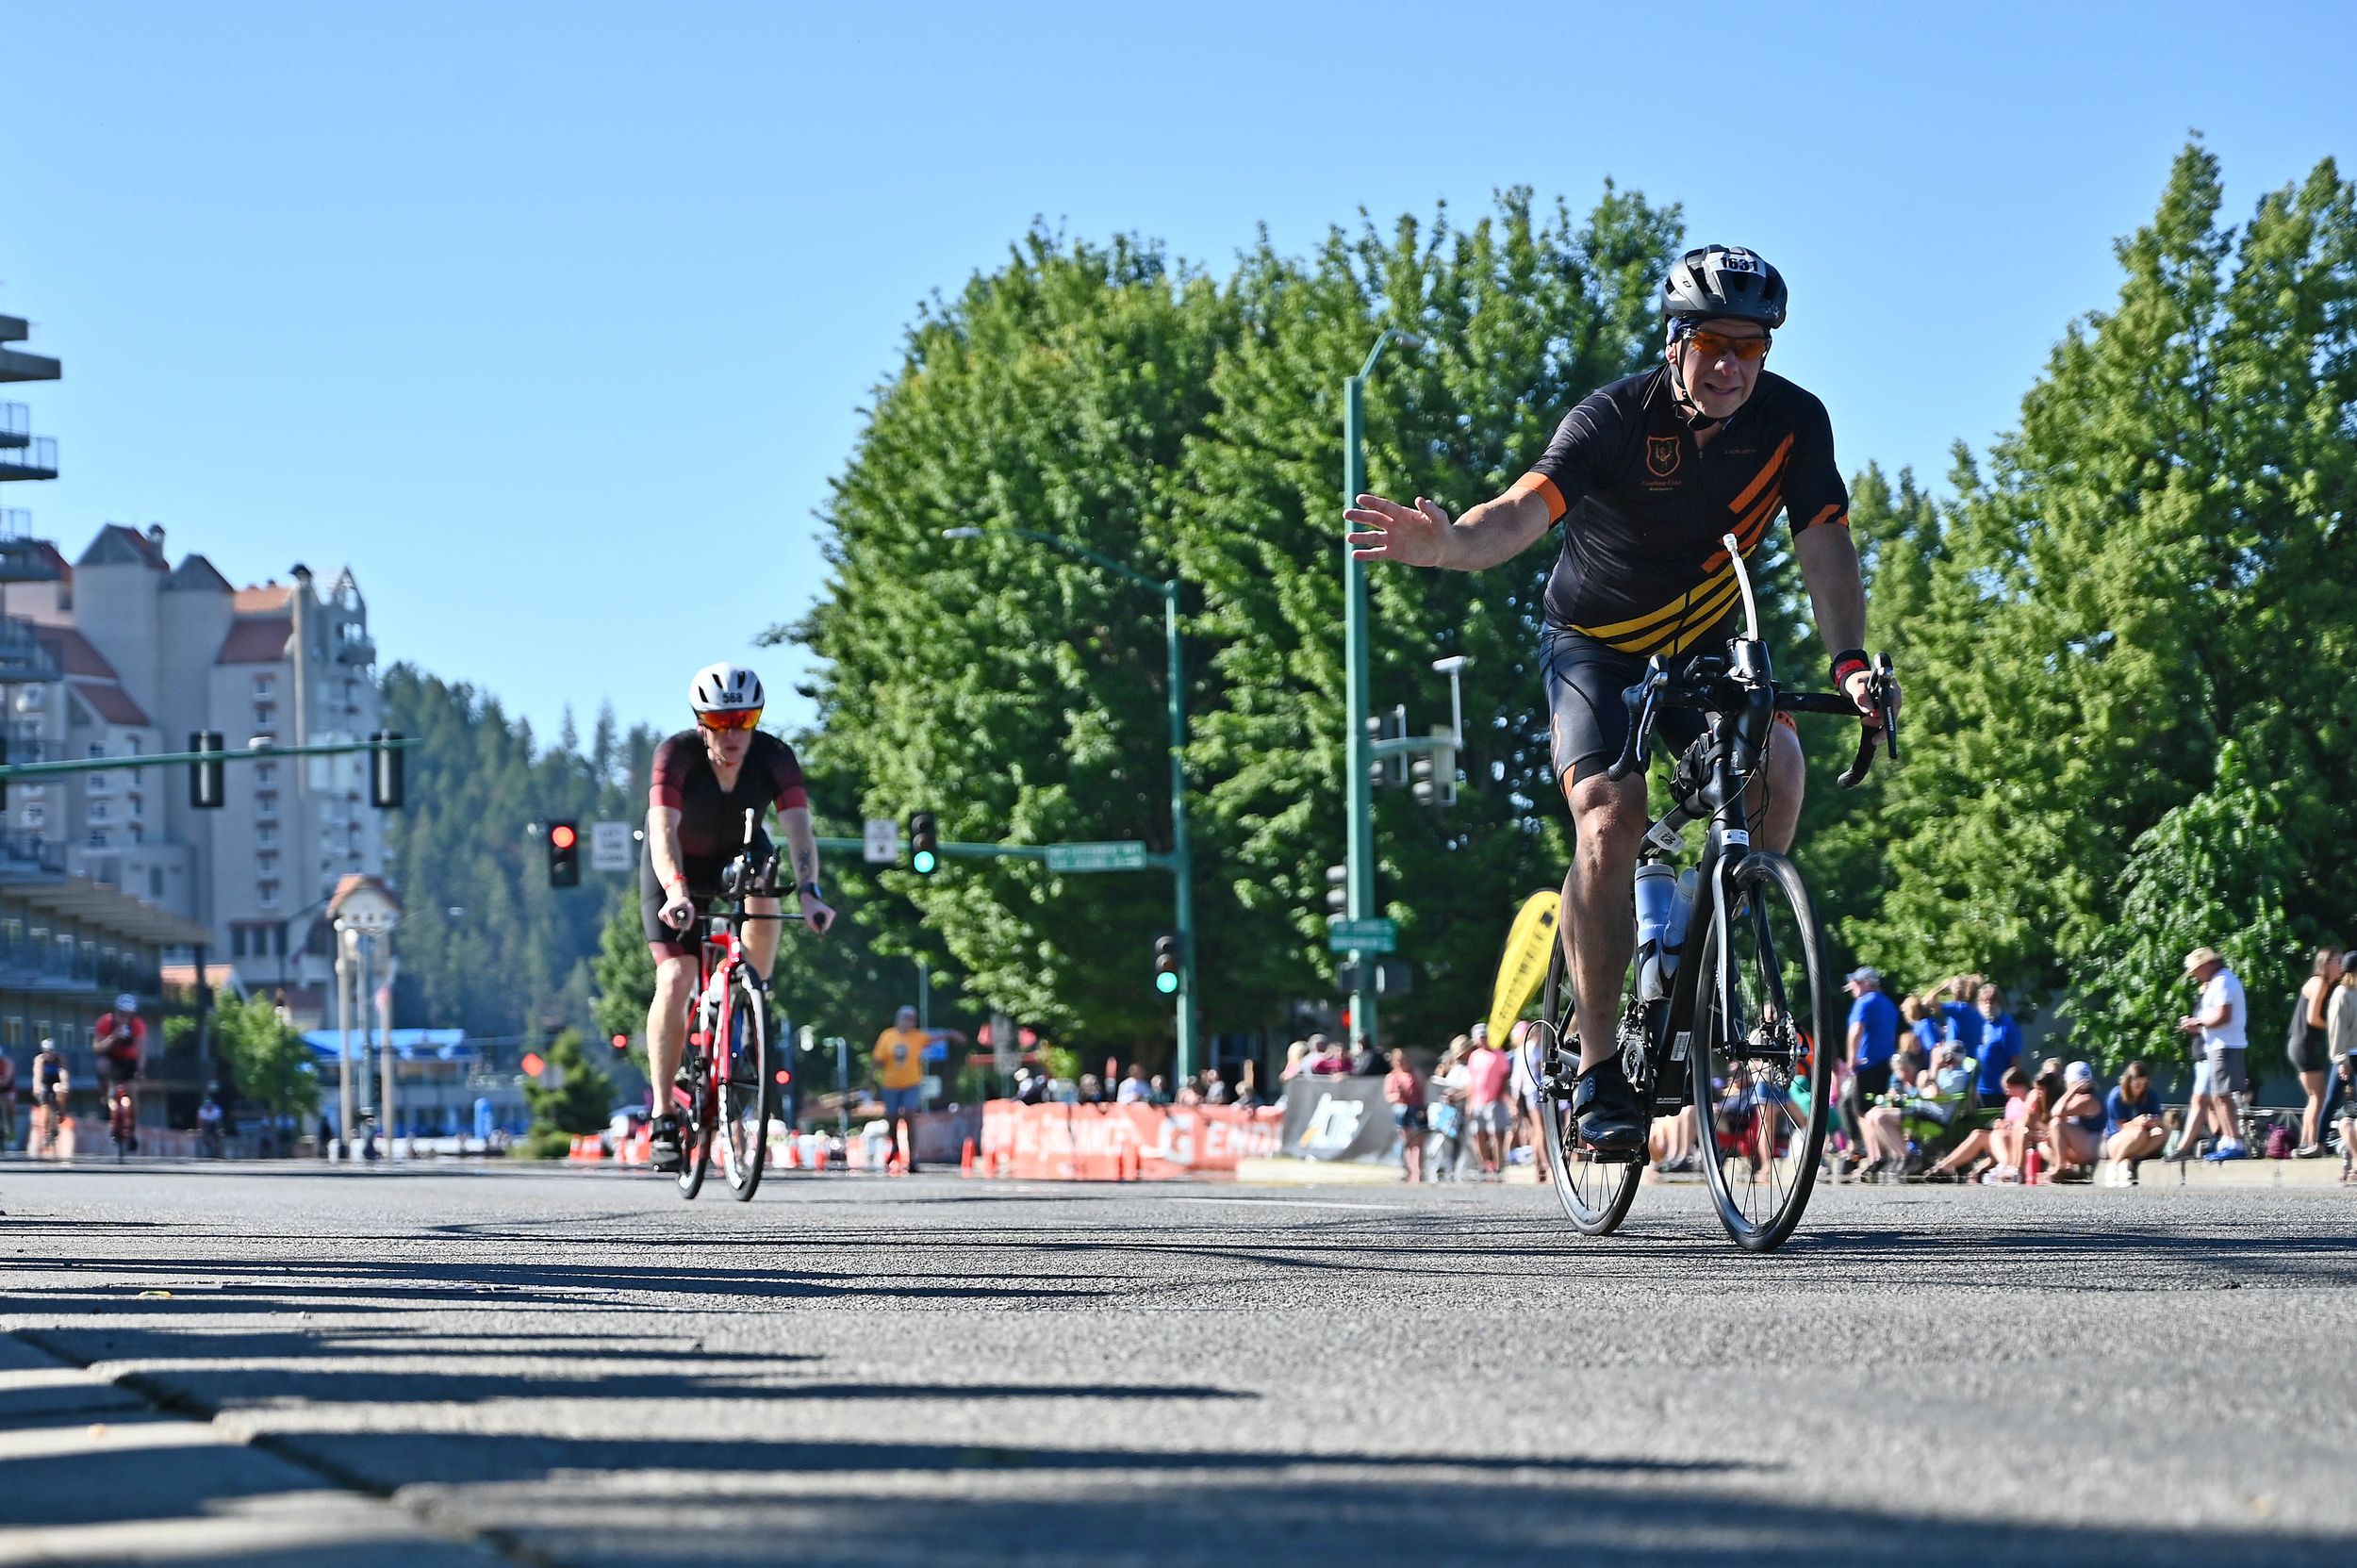 Ironman 2022 in Coeur d'Alene June 26, 2022 The SpokesmanReview